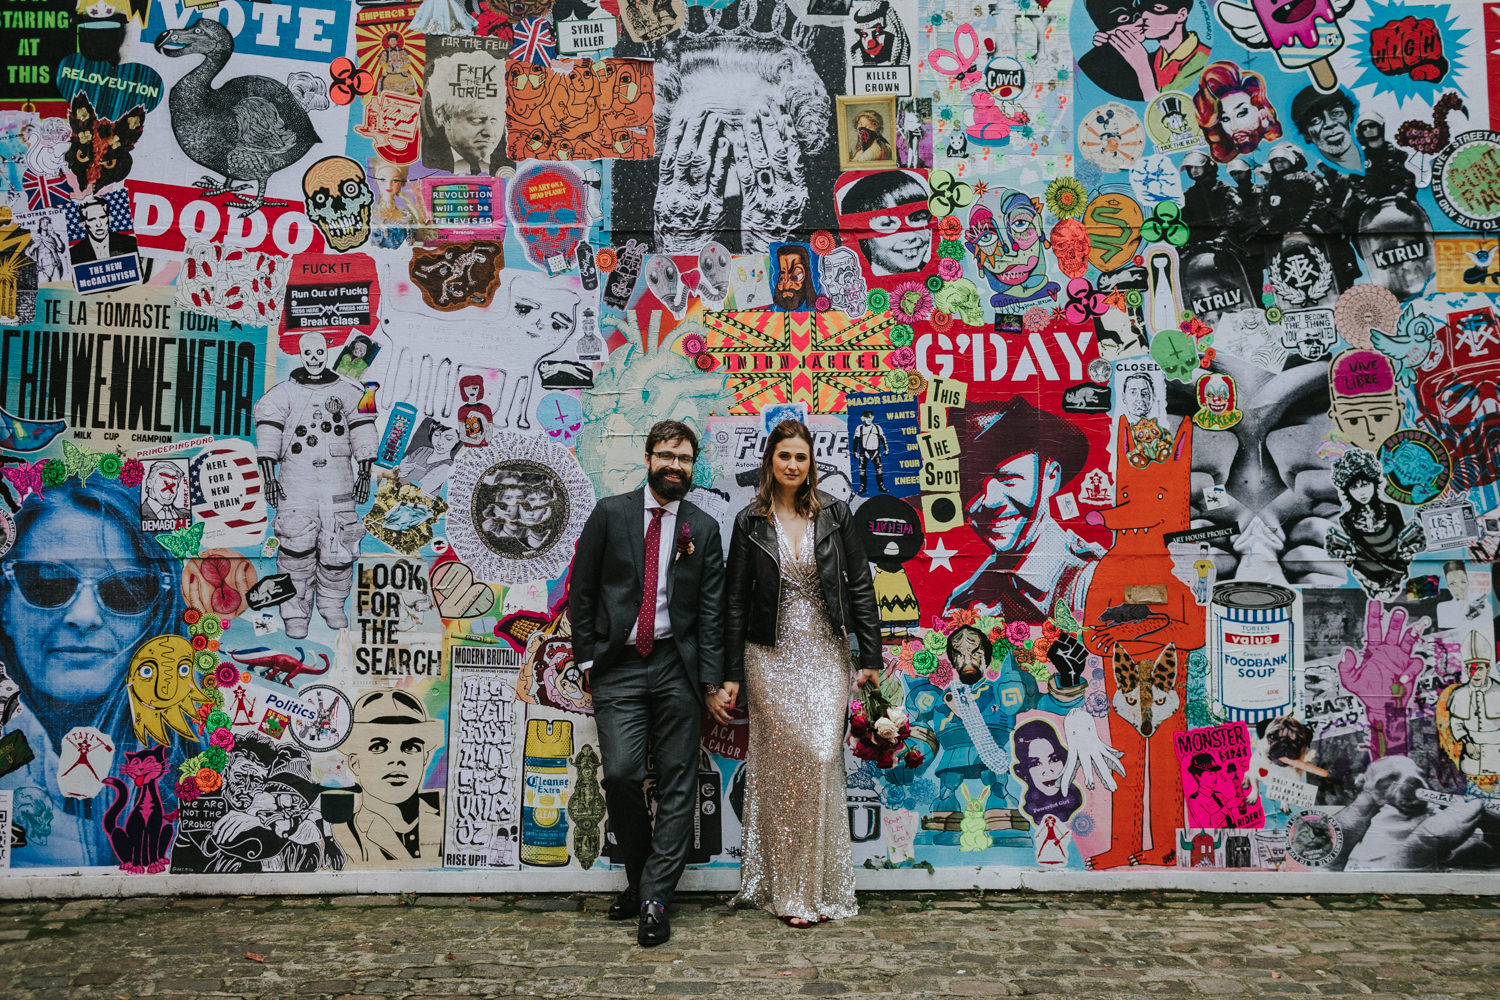 Bride and groom holding hands in front of a wall with street art in Shoreditch London.